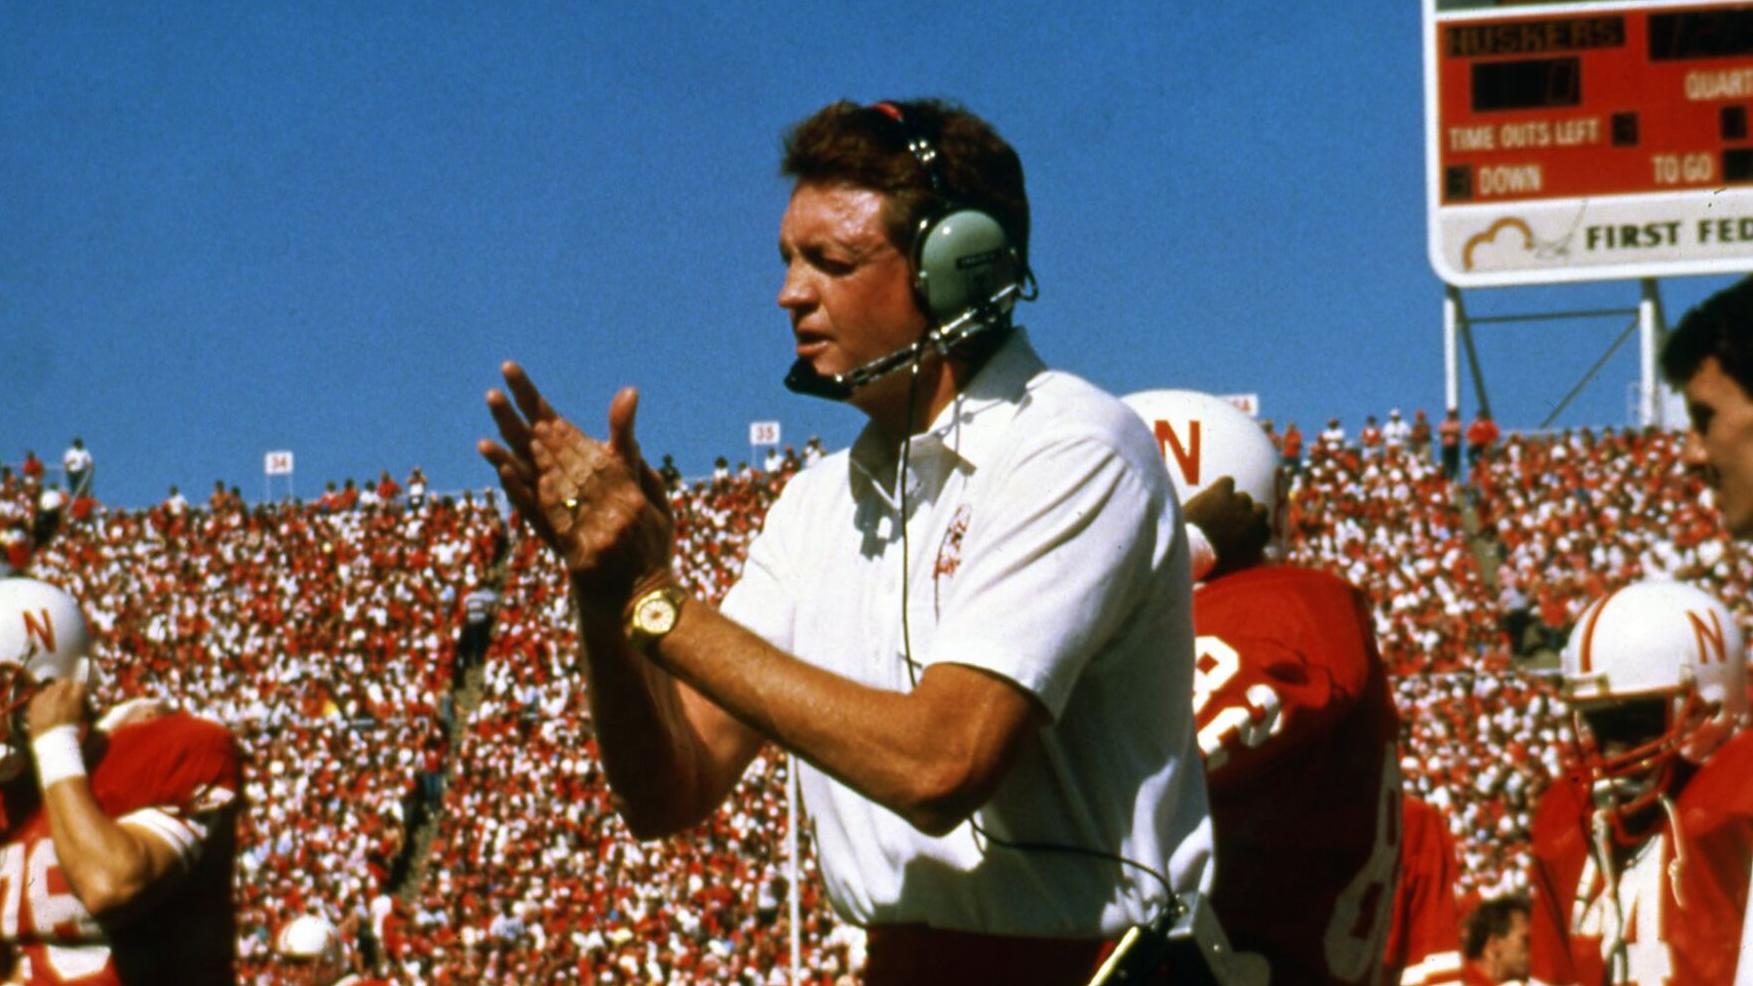 Review: Well-done Tom Osborne documentary premieres in Lincoln theaters